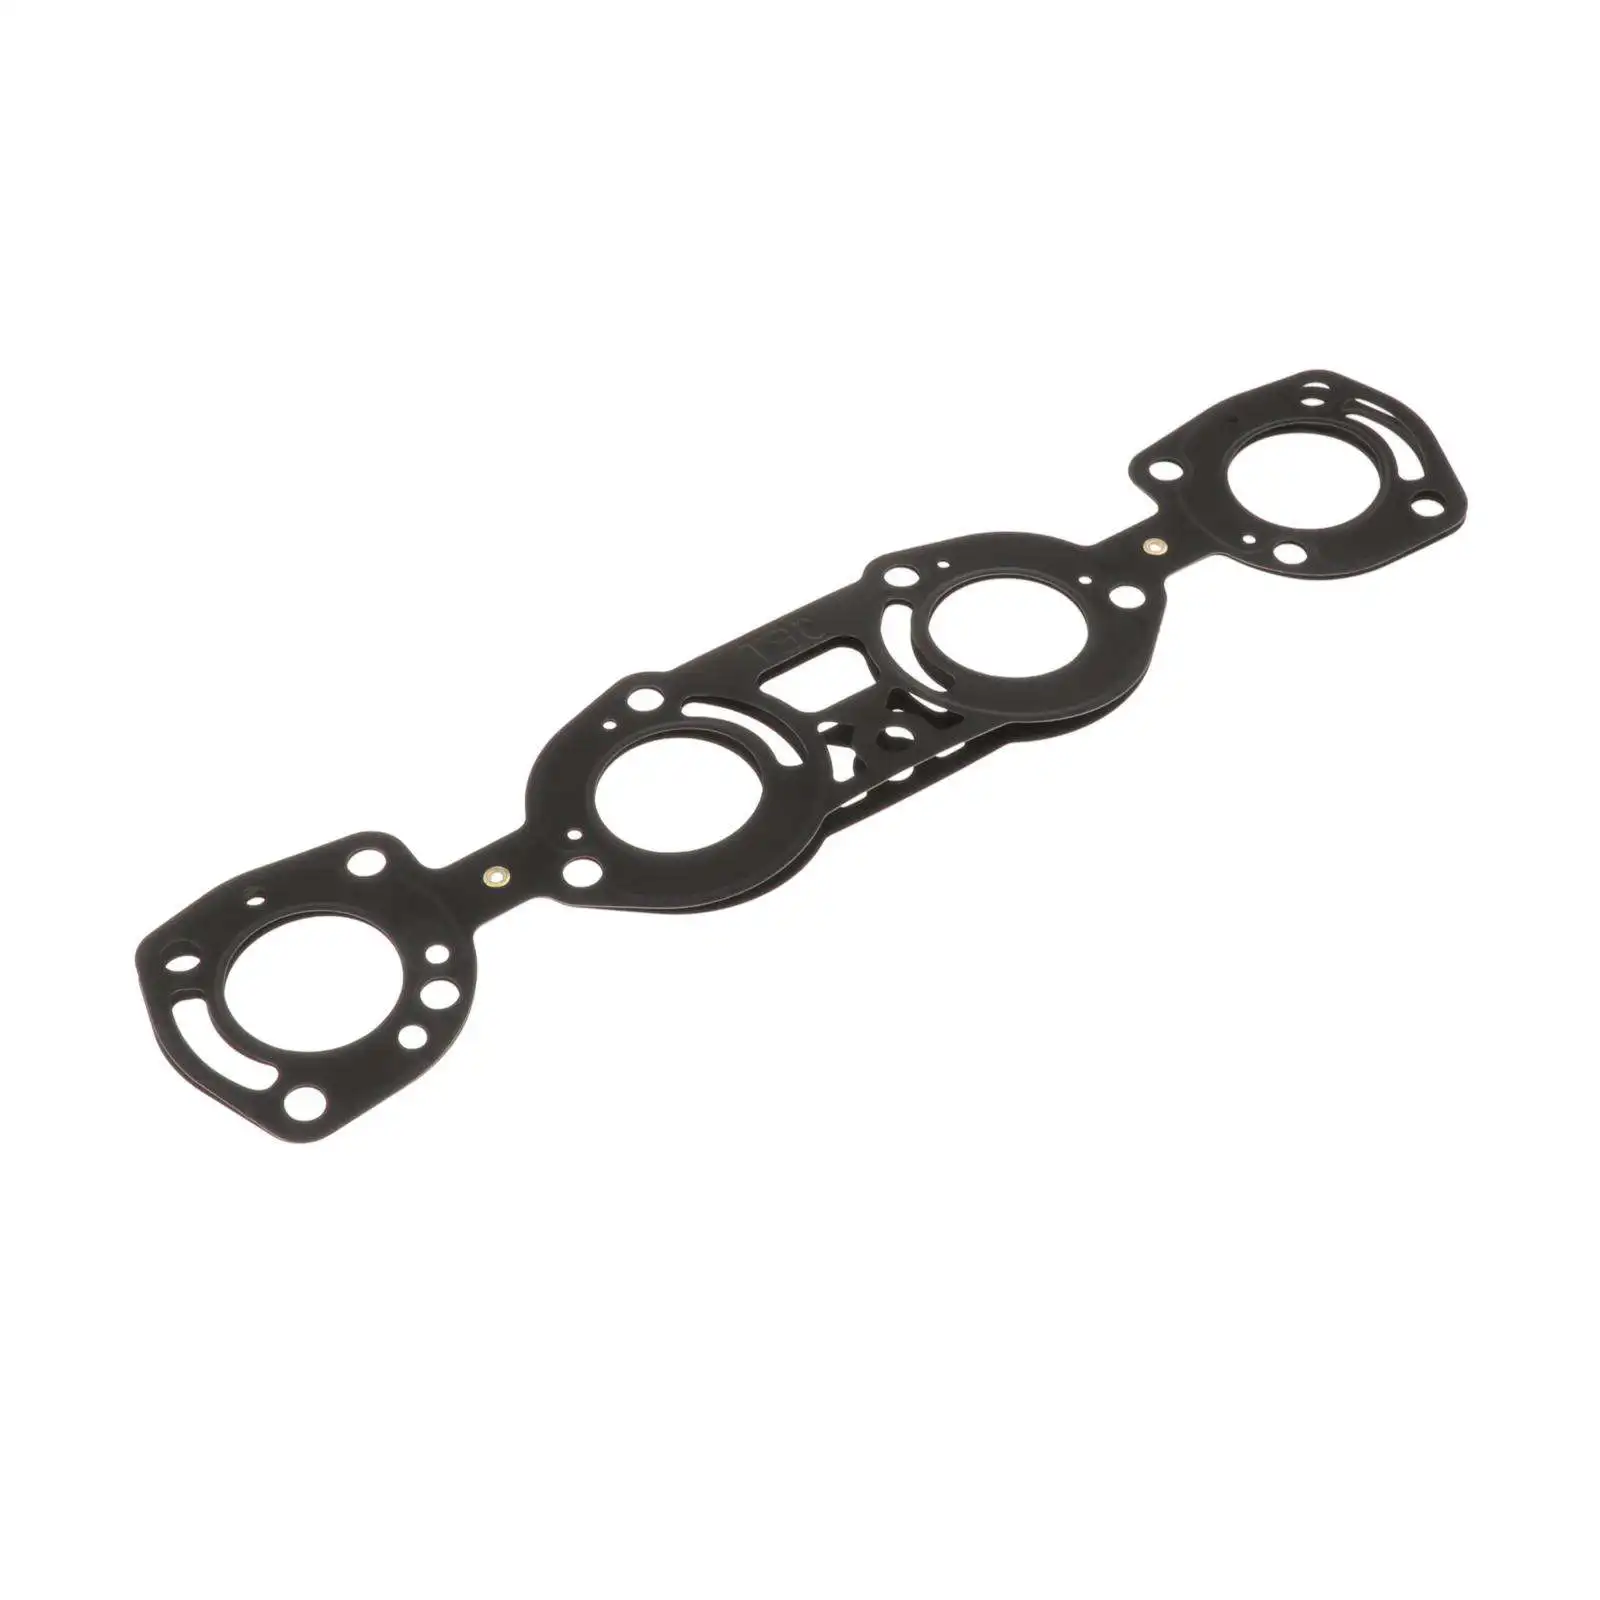 Exhaust Pipe Gasket , Fit for  FZR1800 GP1800, 6ET-14613-00-00 , Replace